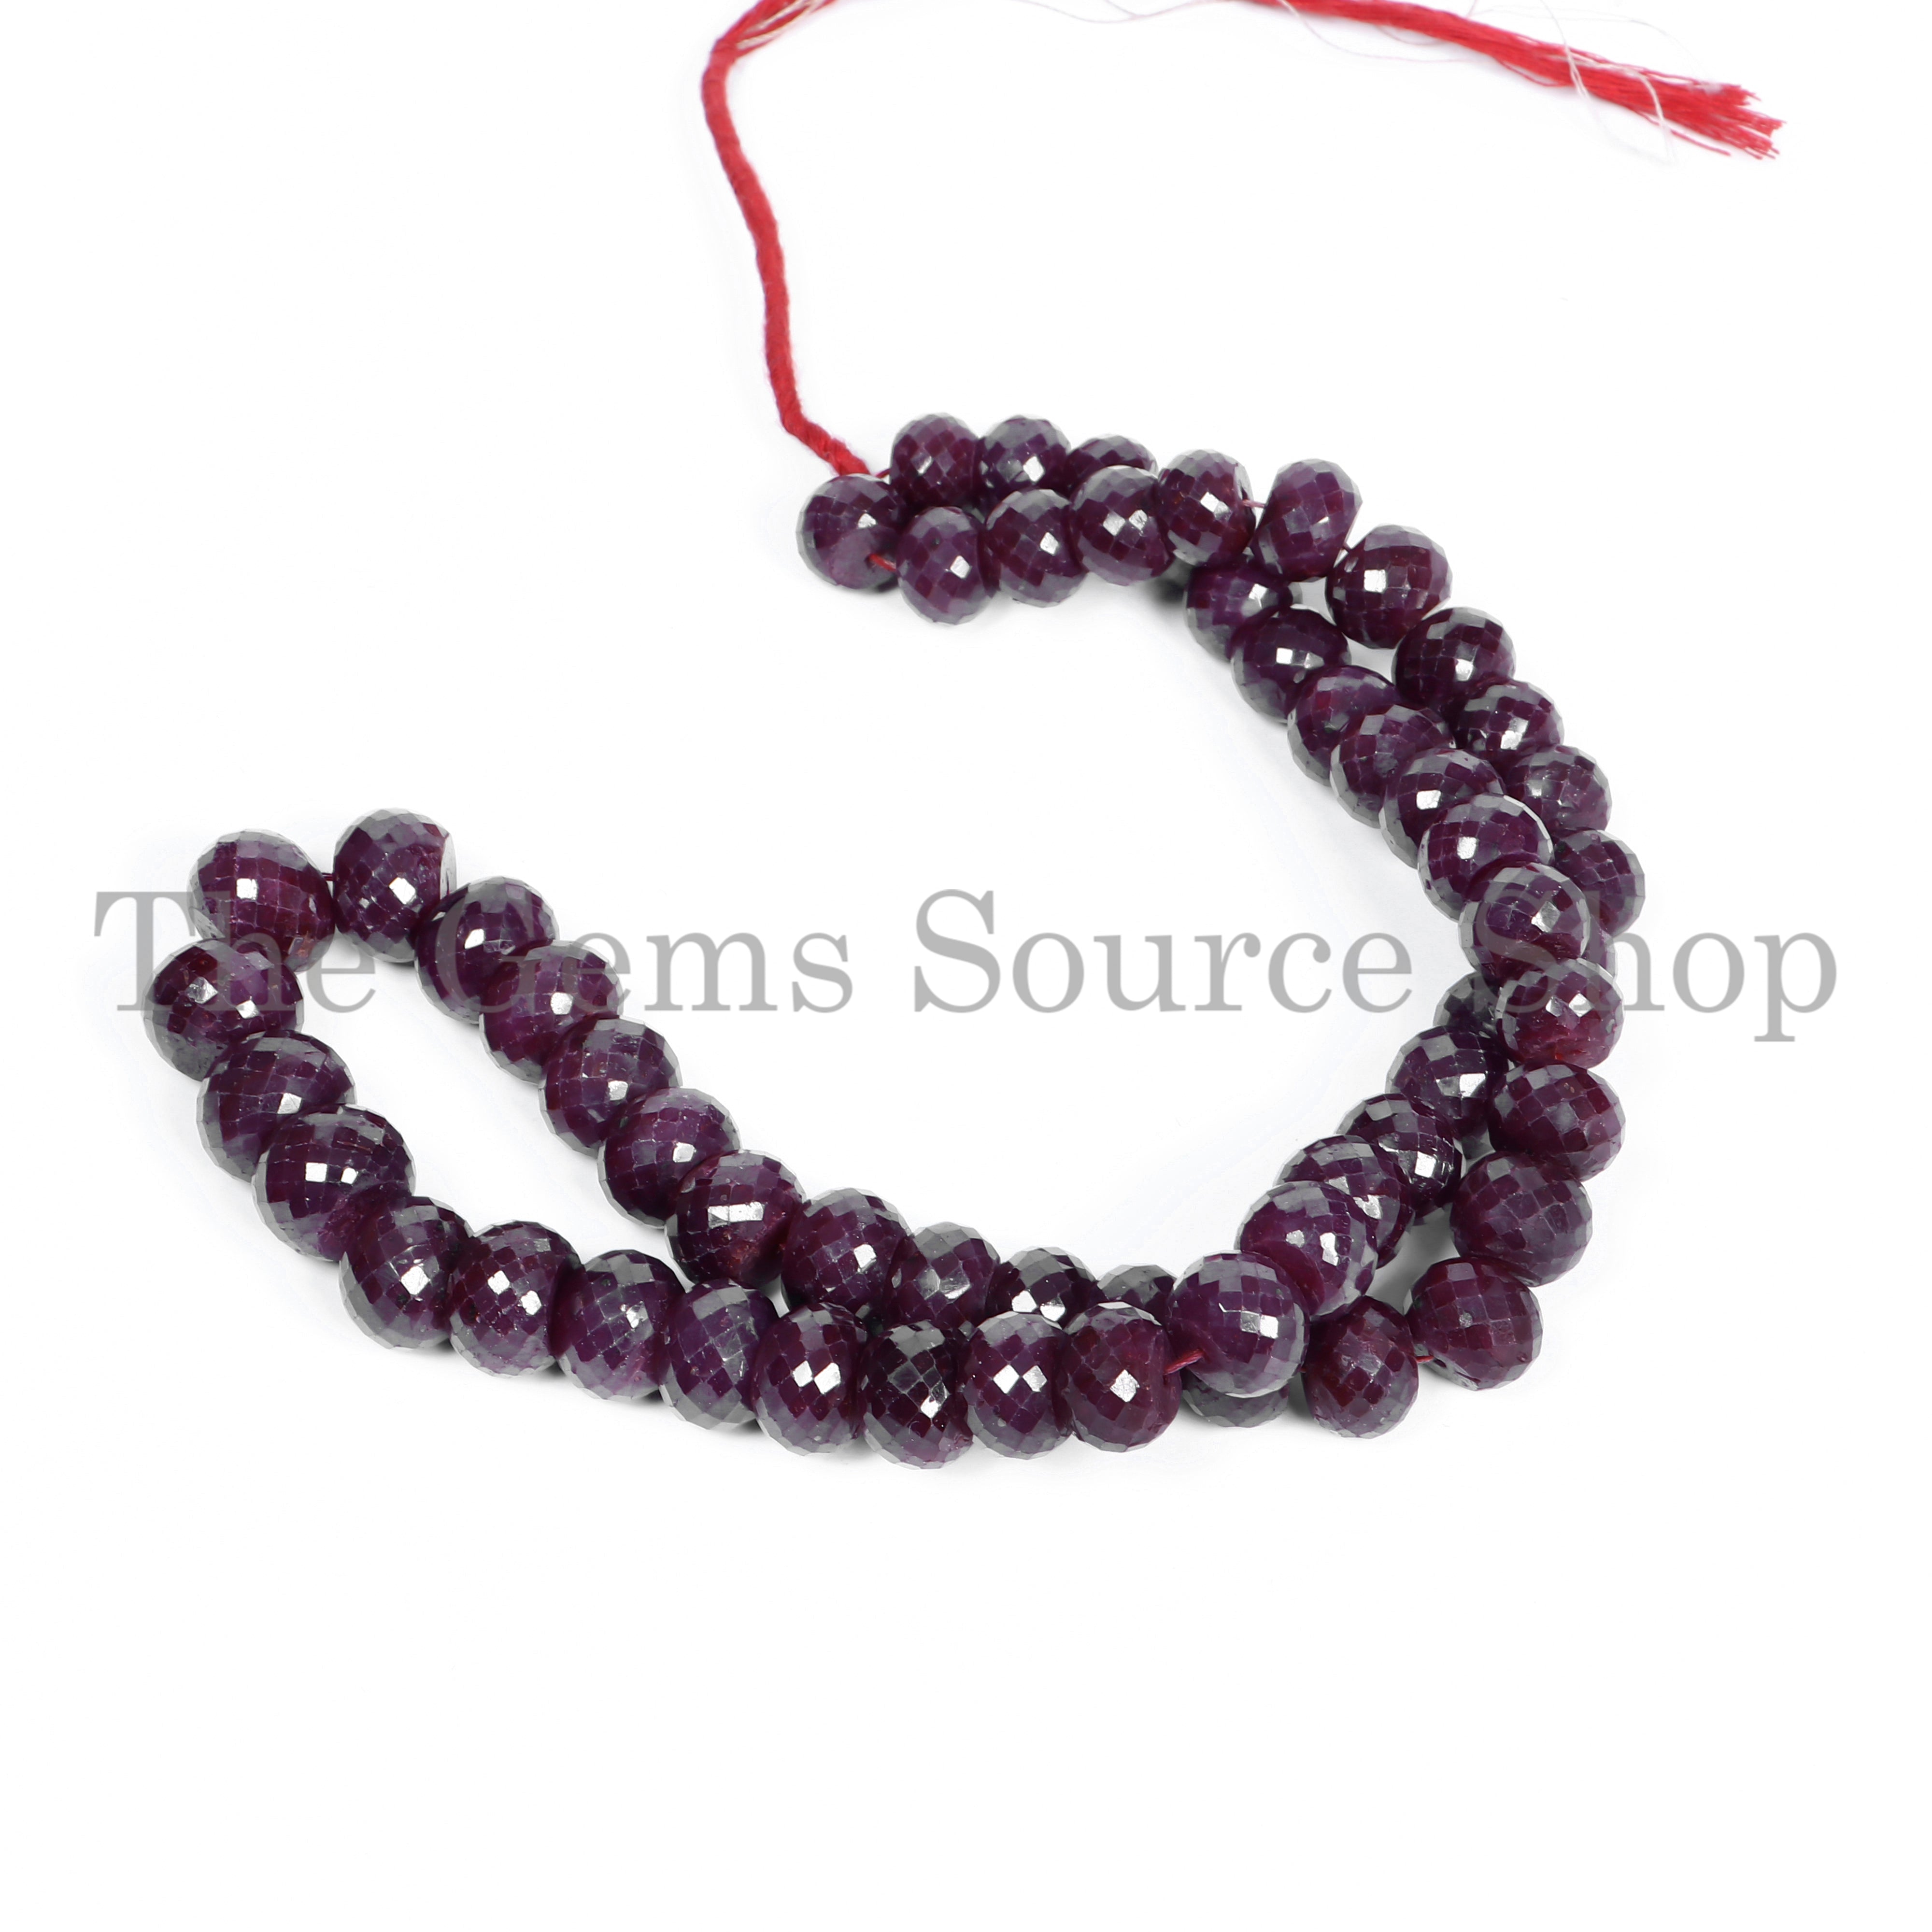 Top Quality Ruby Beads, Ruby Rondelle Beads, Ruby Faceted Beads, Ruby Gemstone Beads